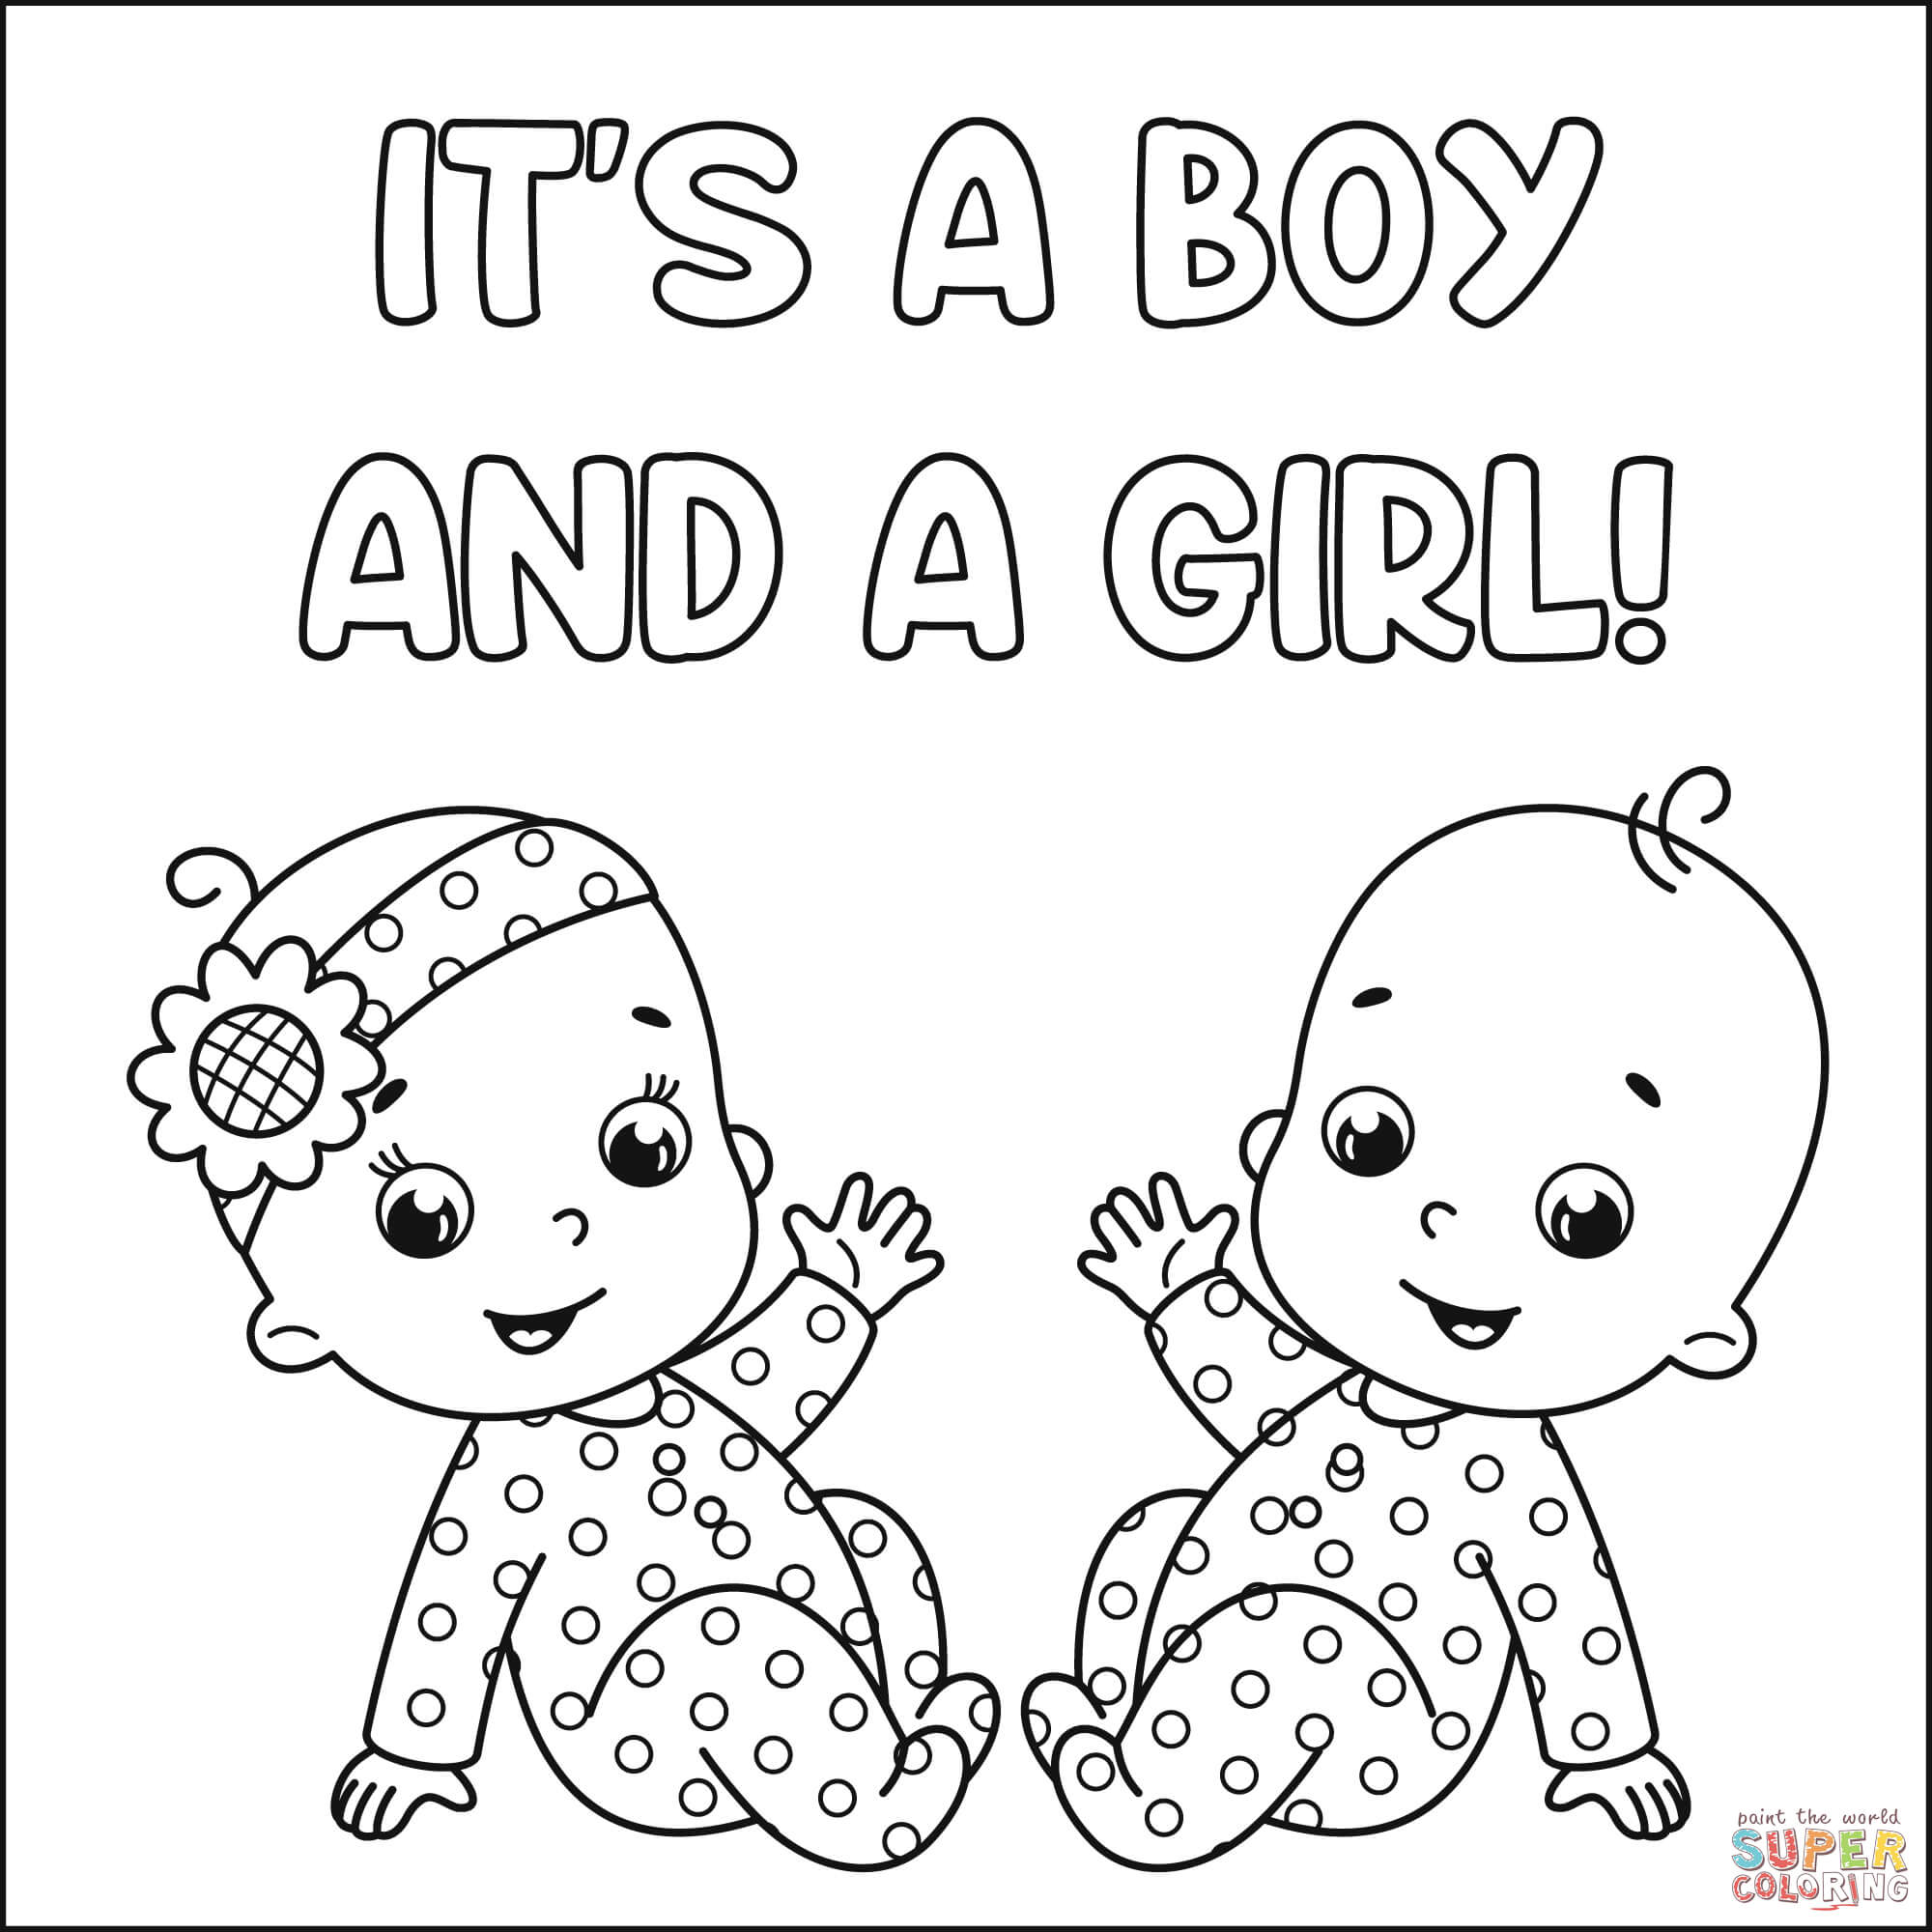 It's a Boy and a Girl coloring page | Free Printable Coloring Pages